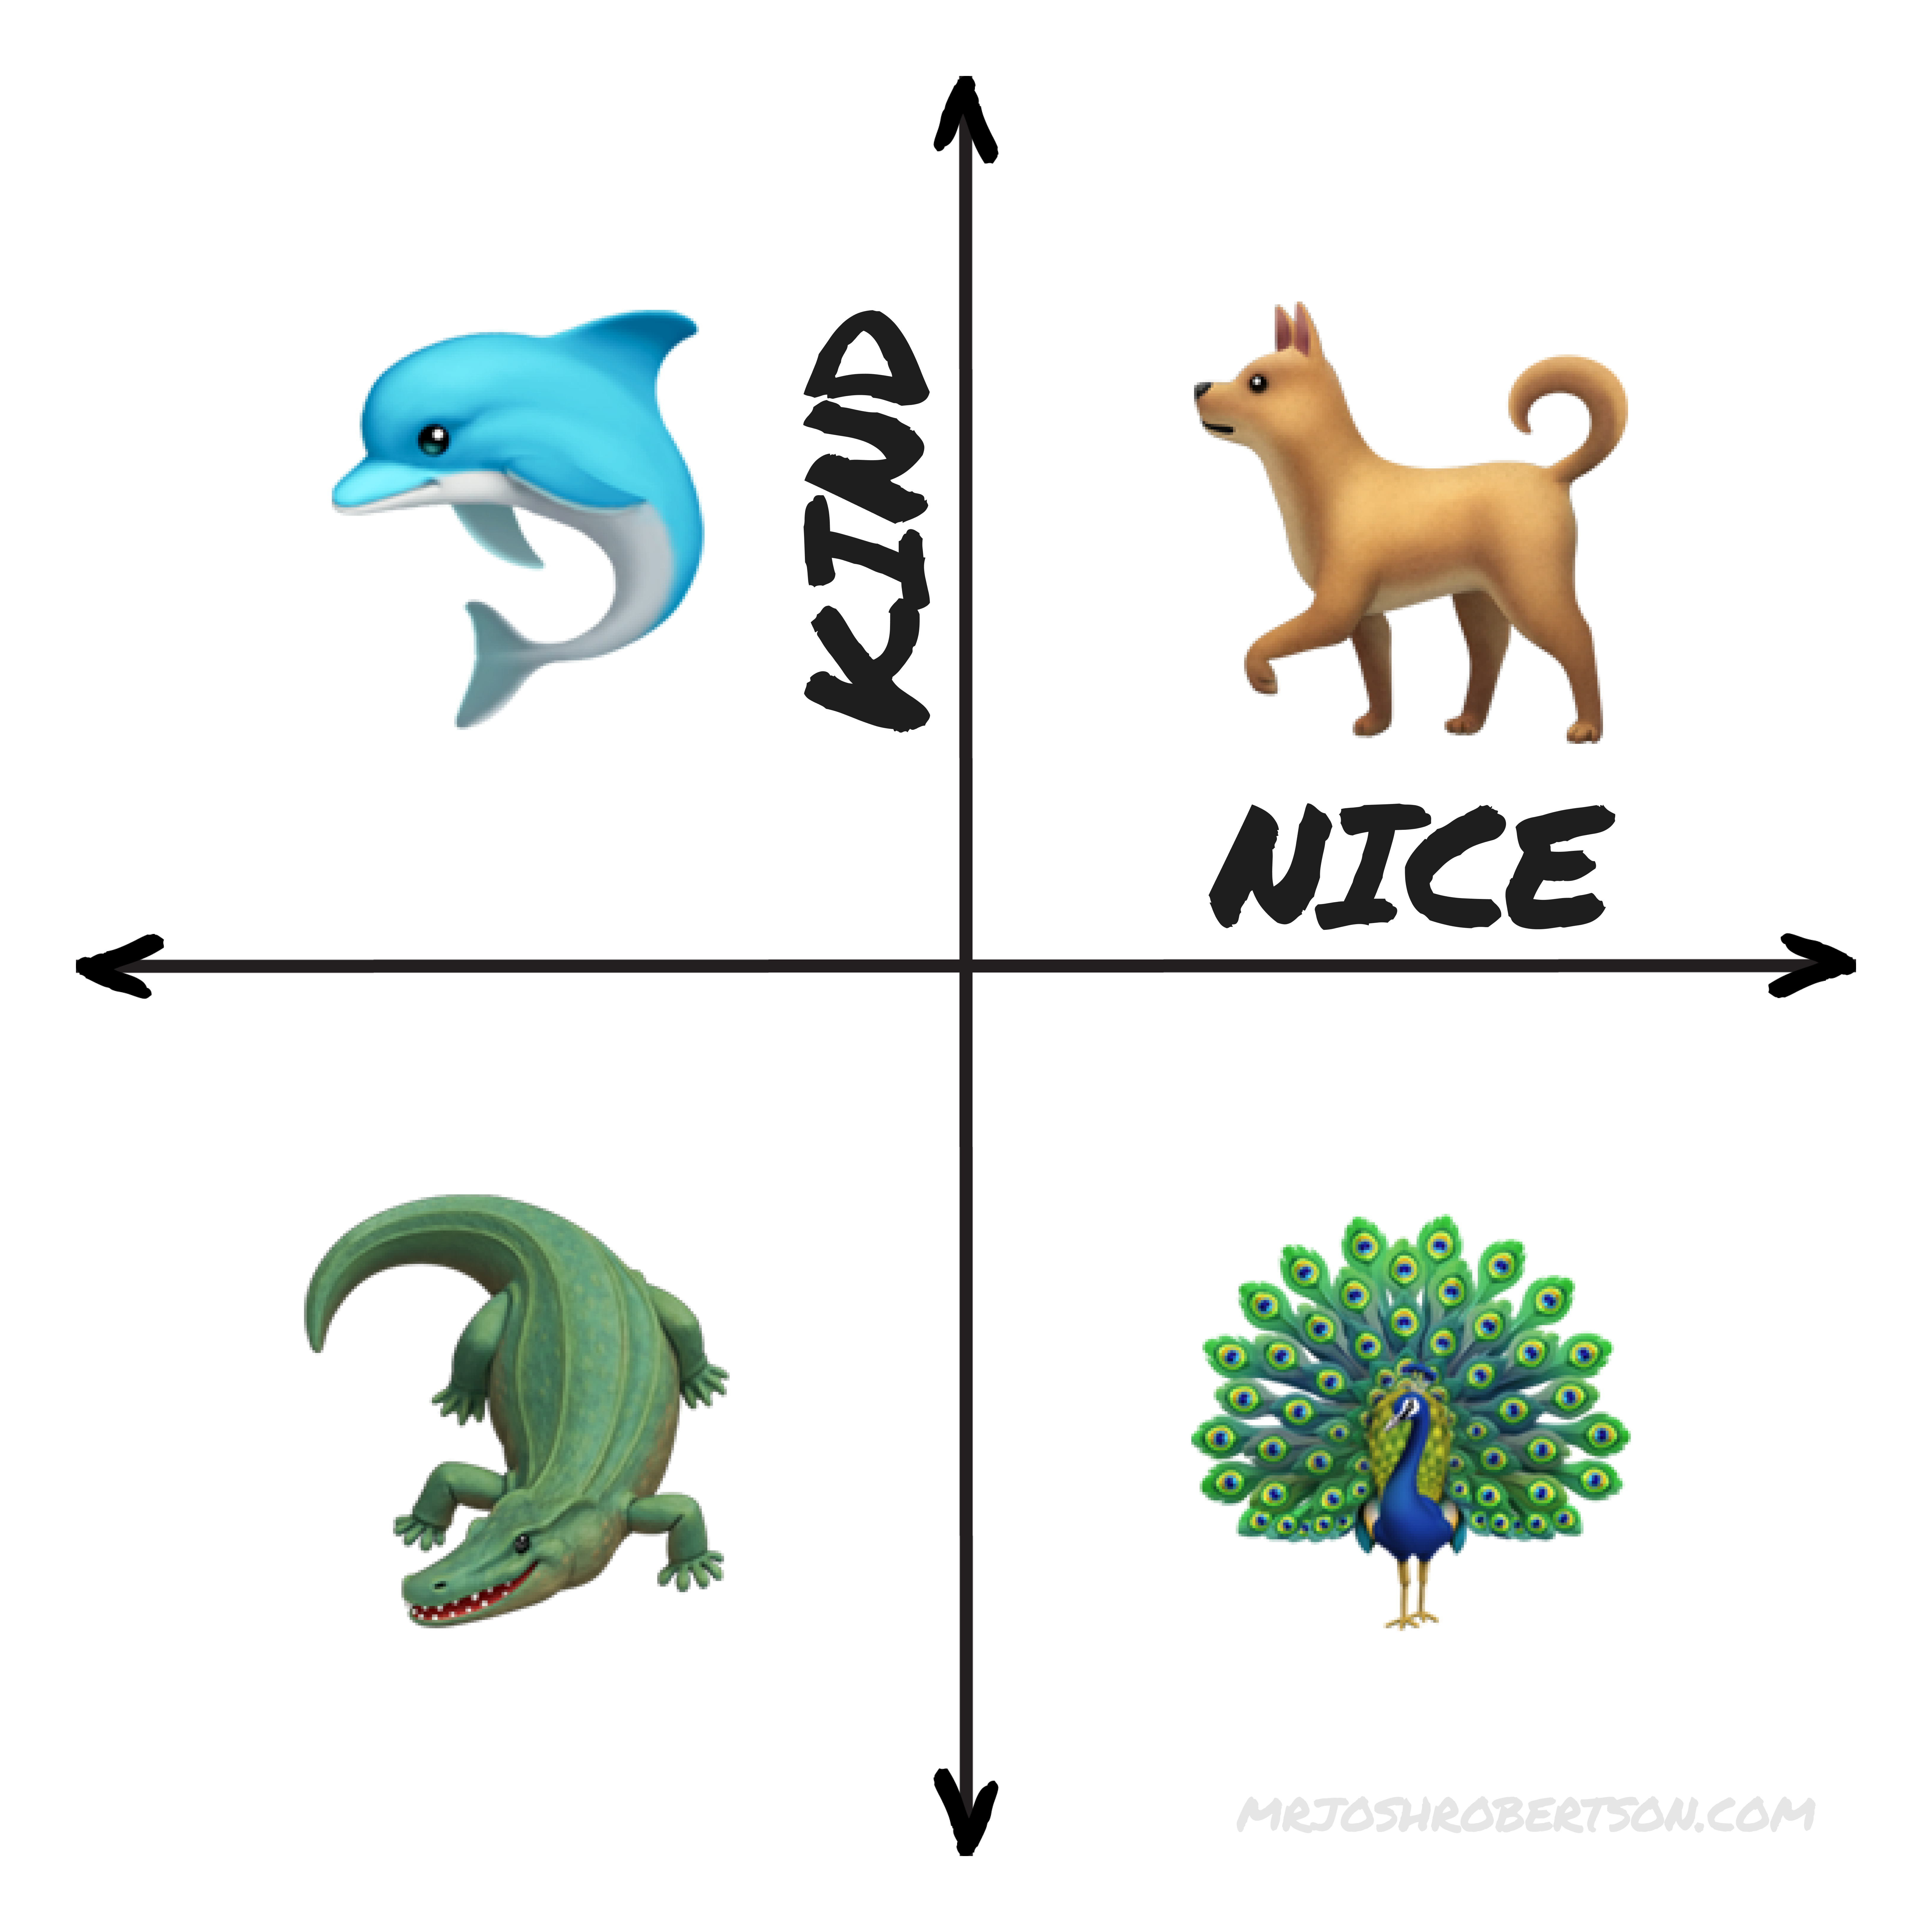 A 2x2 chart with axes labeled "Kind" (vertical) and "Nice" (horizontal). The top left quadrant shows a dolphin emoji (🐬), representing high kindness and low niceness. The top right quadrant displays a dog emoji (🐕), specifically a golden retriever, representing high kindness and high niceness. The bottom left quadrant features a crocodile emoji (🐊), symbolizing low kindness and low niceness. The bottom right quadrant contains a peacock emoji (🦚), representing low kindness and high niceness.